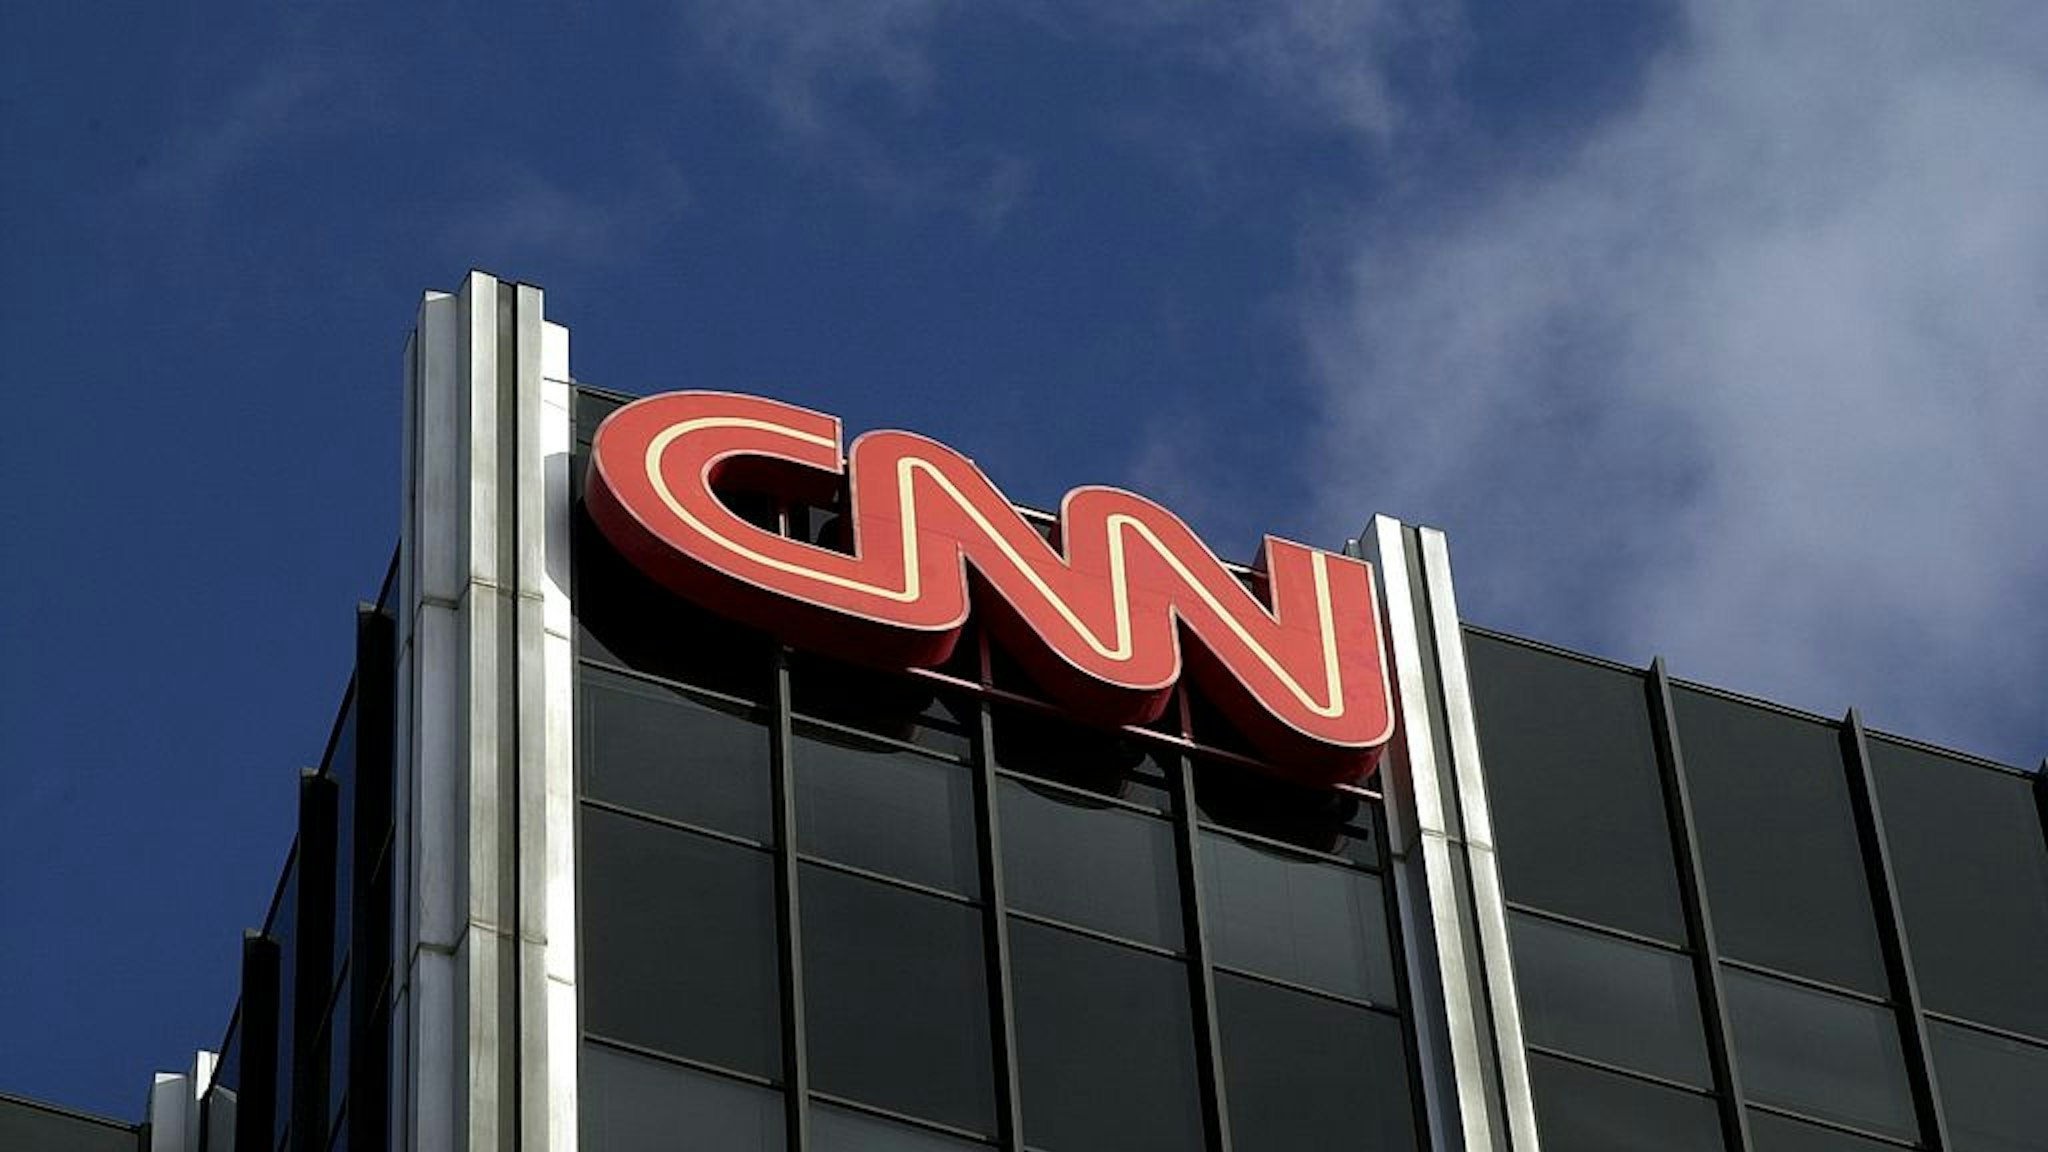 384757 02: The Cable News Network (CNN) logo adorns the top of CNN's offices on the Sunset Strip, January 24, 2000 in Hollywood, CA. CNN was hit with job cuts earlier this week after CNN's parent company, Time-Warner, Inc., completed its merger with America Online, Inc. (Photo by David McNew/Newsmakers)